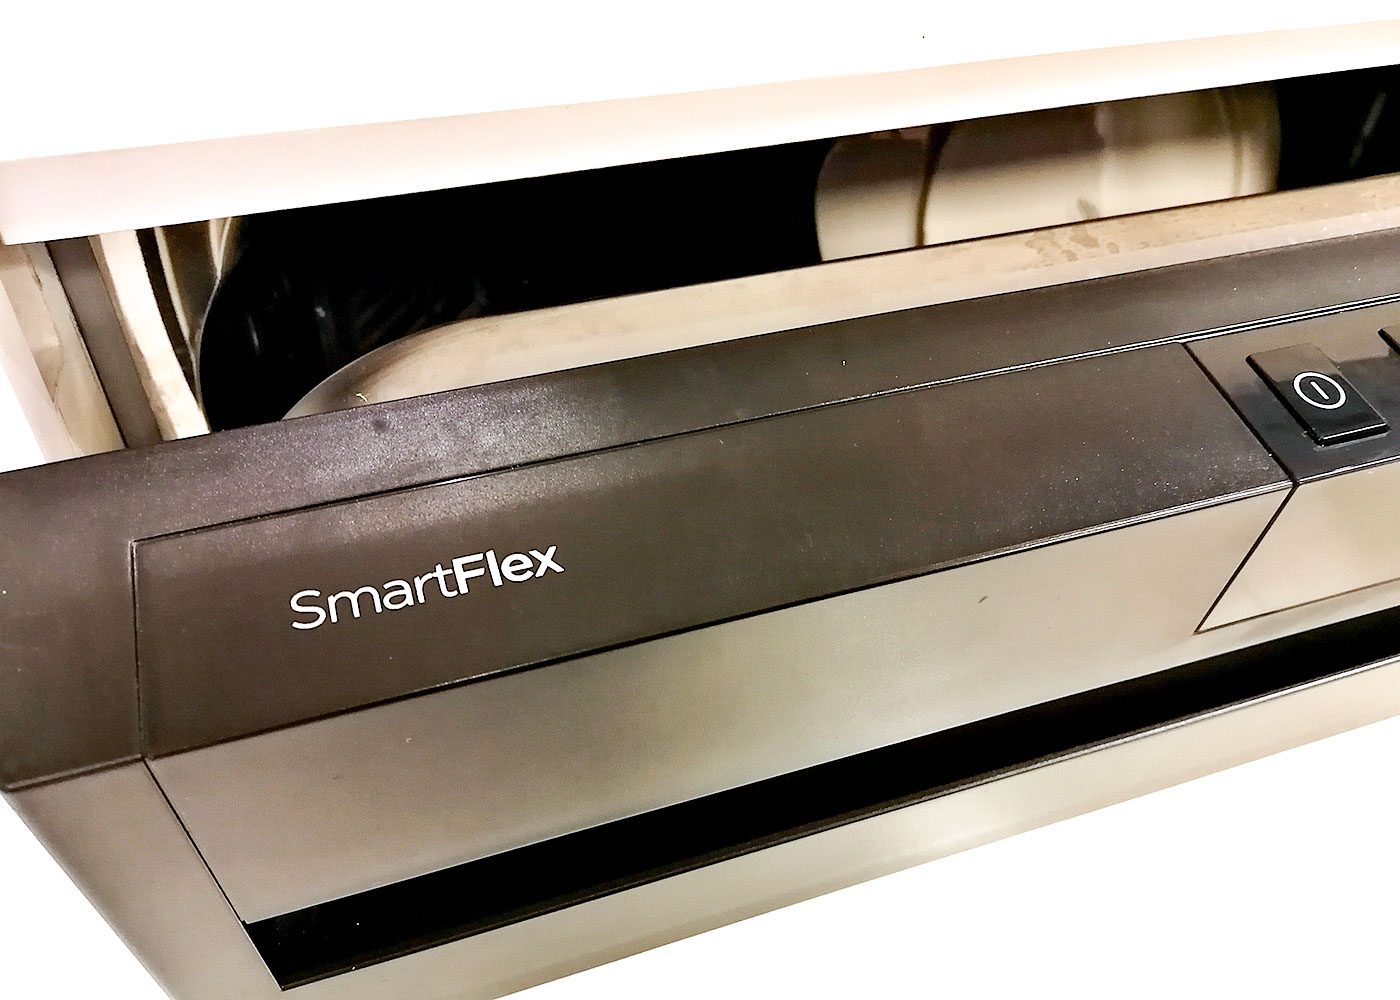 SMARTFLEX. The brand's pieces, such as this dishwasher, includes technology that allows homeowners to customize the layout of their appliance. 